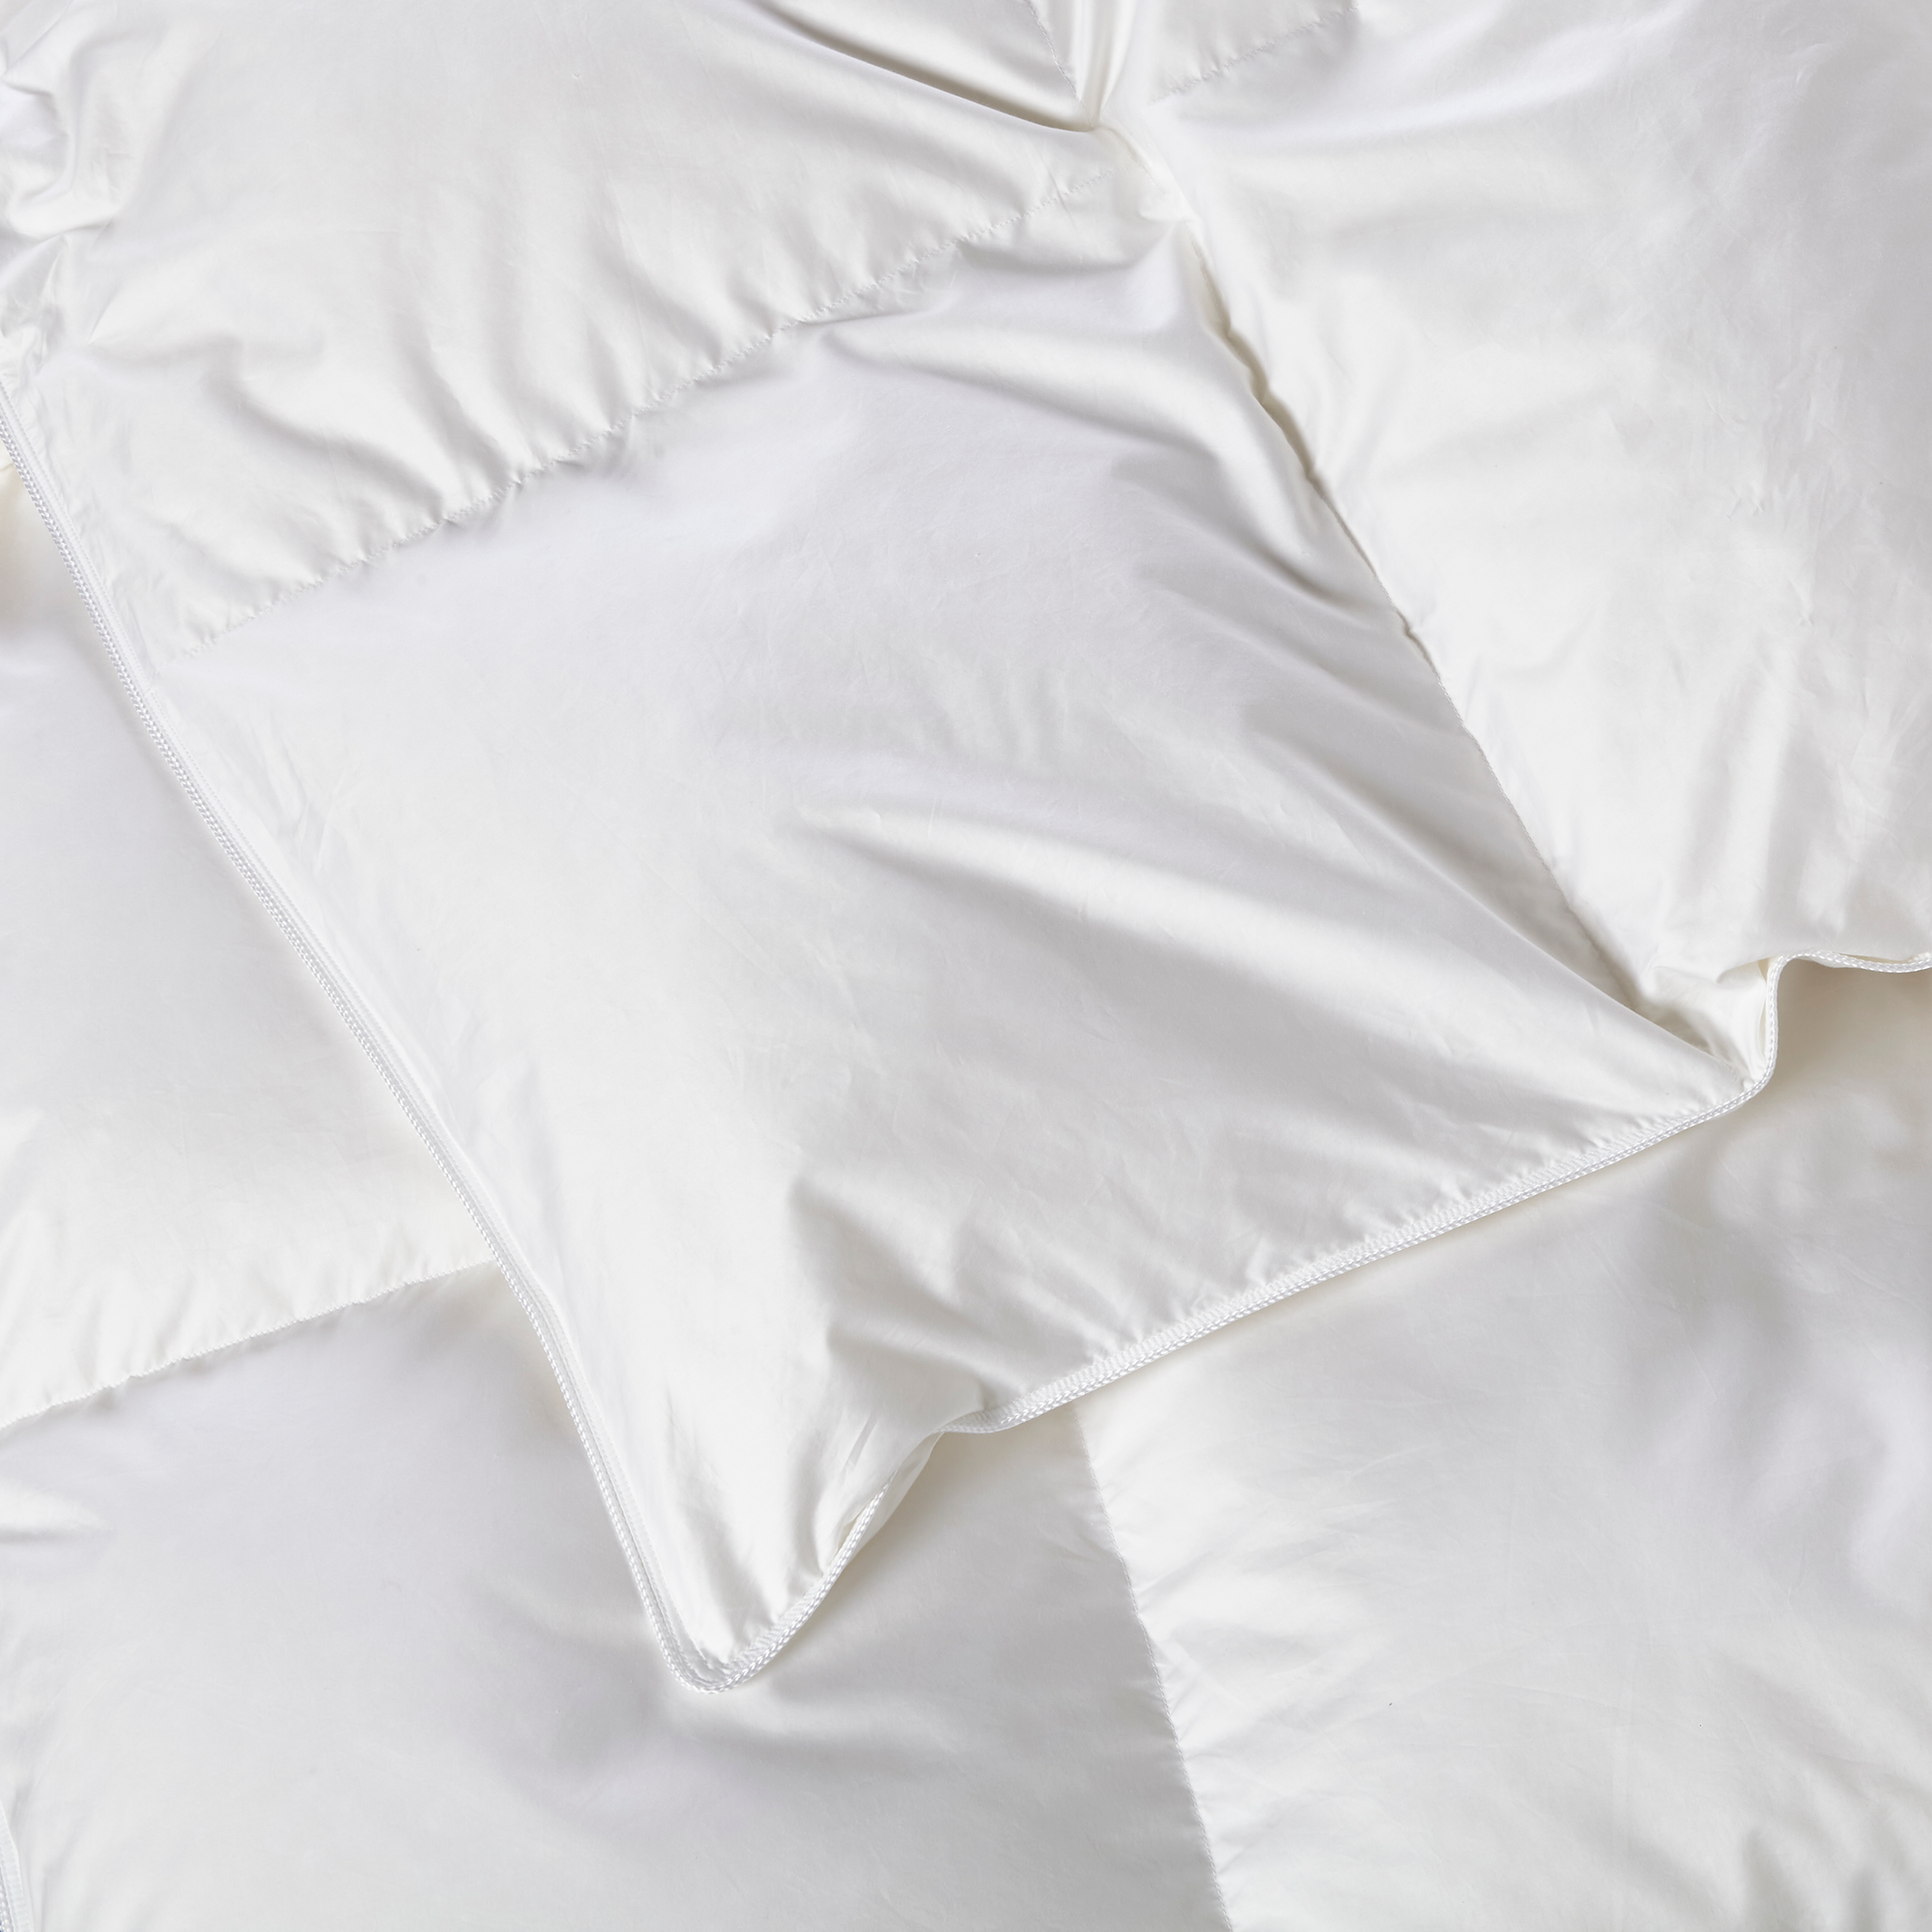 This duvet is made with white goose down from Poland that is highly regarded for its exceptional quality and features the comfort of 600 Fill Power.